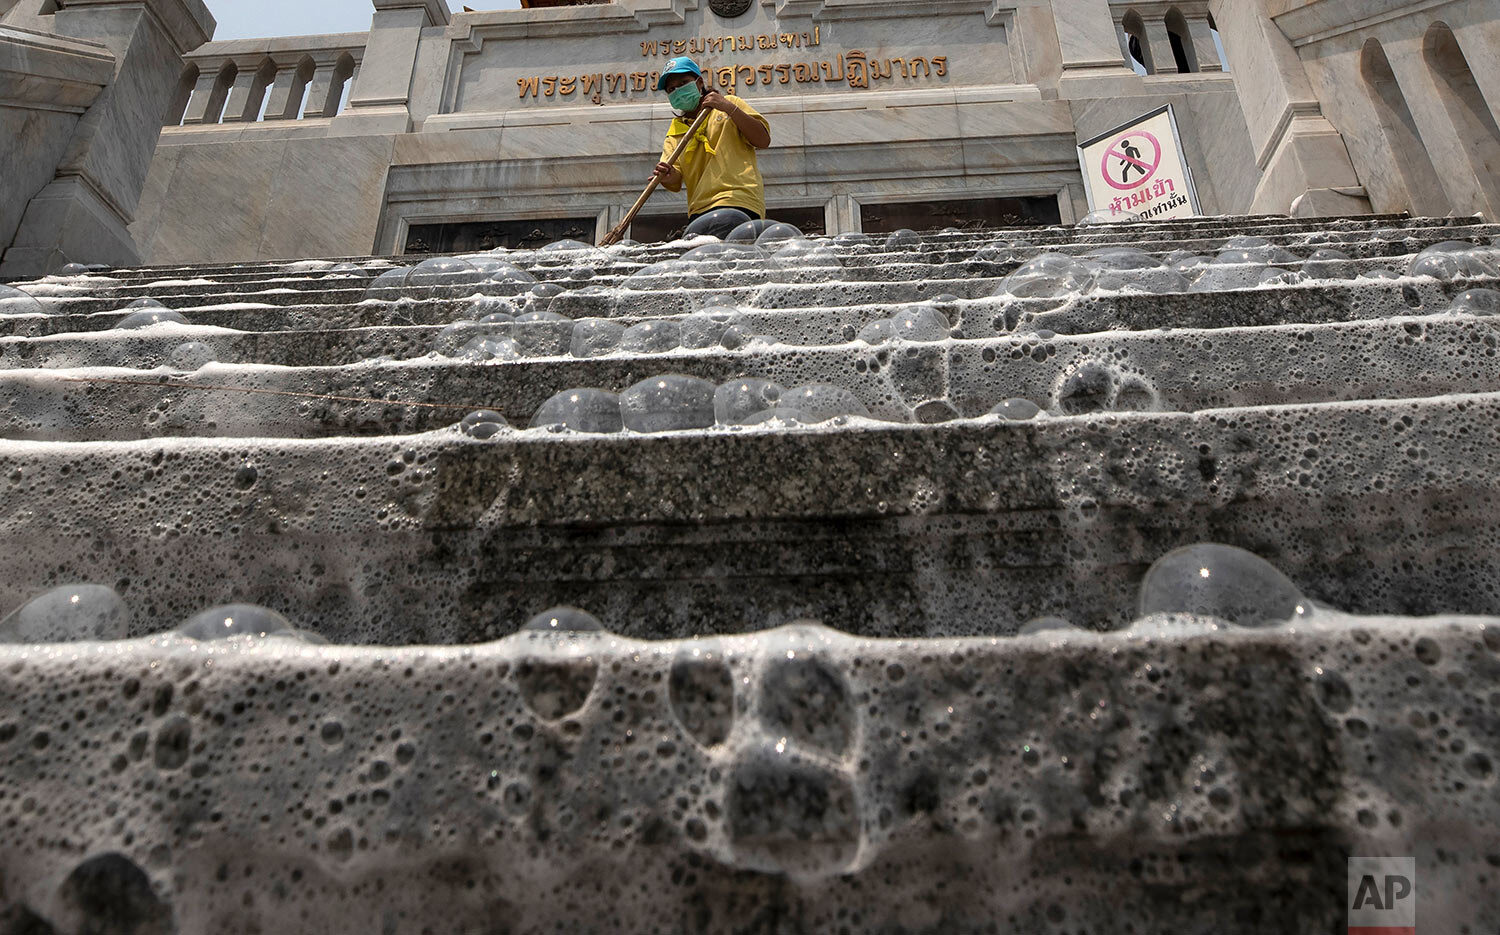  Soap bubbles cover the steps of Wat Taimit Temple as volunteers clean the public areas as a safety precaution against the new coronavirus Wednesday, March 18, 2020, in Bangkok, Thailand. (AP Photo/Sakchai Lalit) 